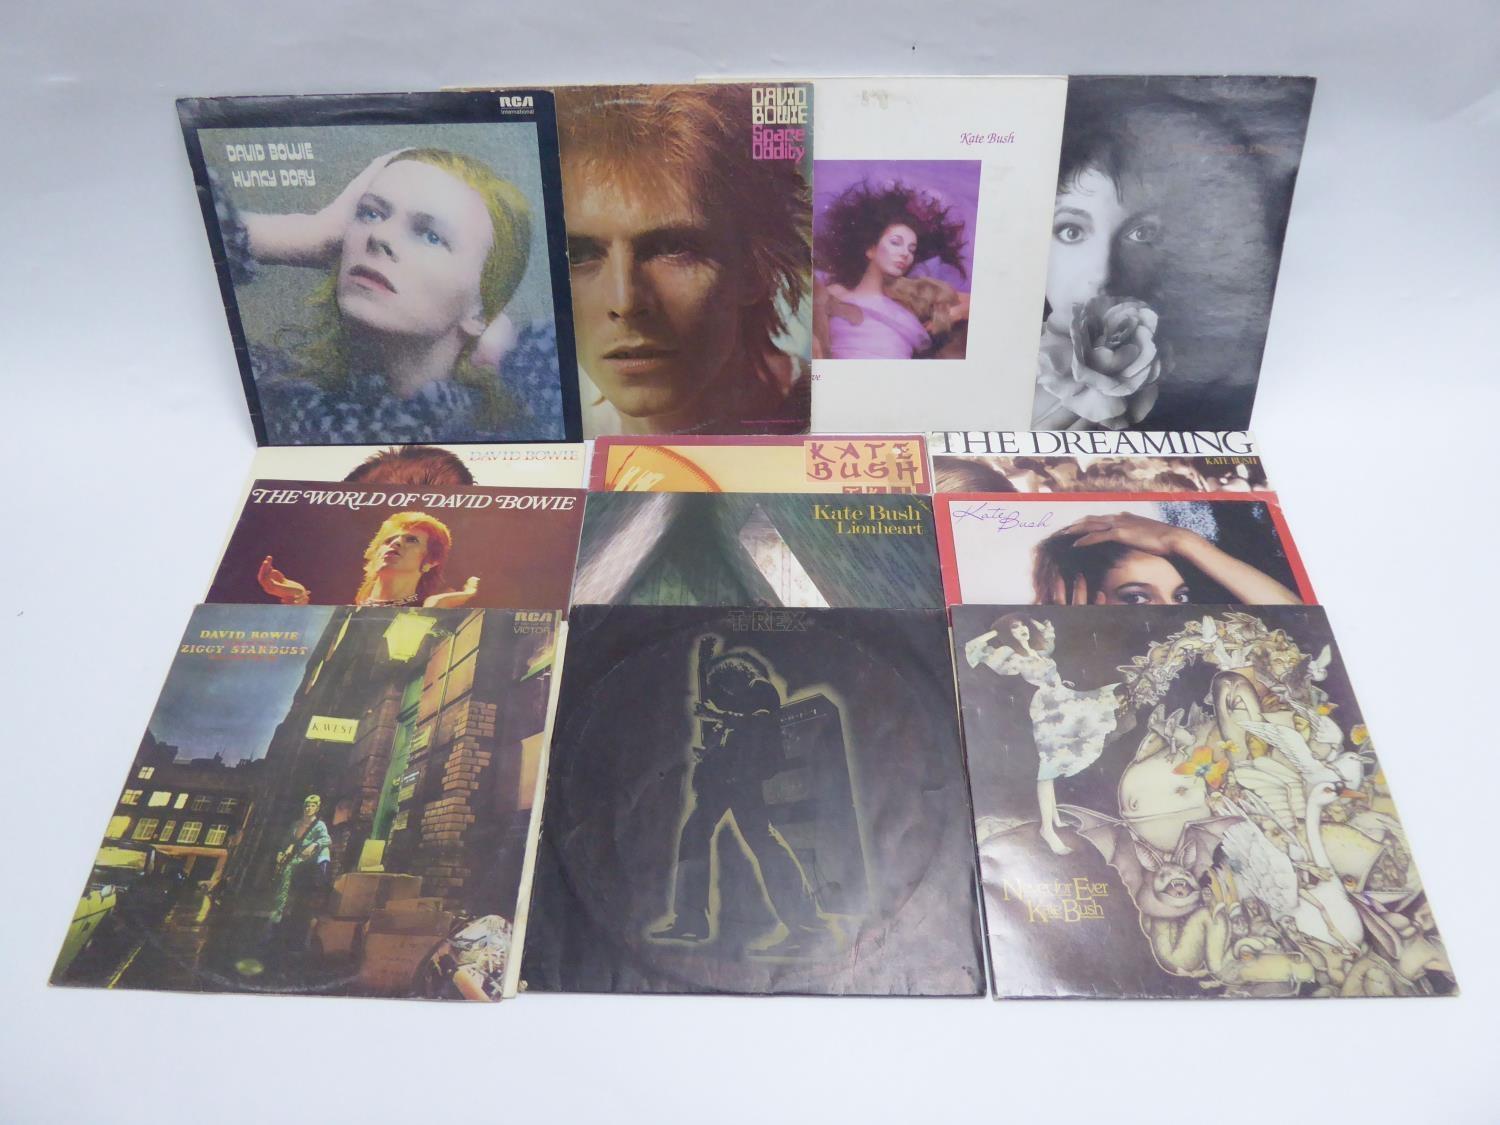 RECORDS, VINYL - David Bowie, The Rise and Fall of Ziggy Stardust, Space Oddity, Aladin Sane,